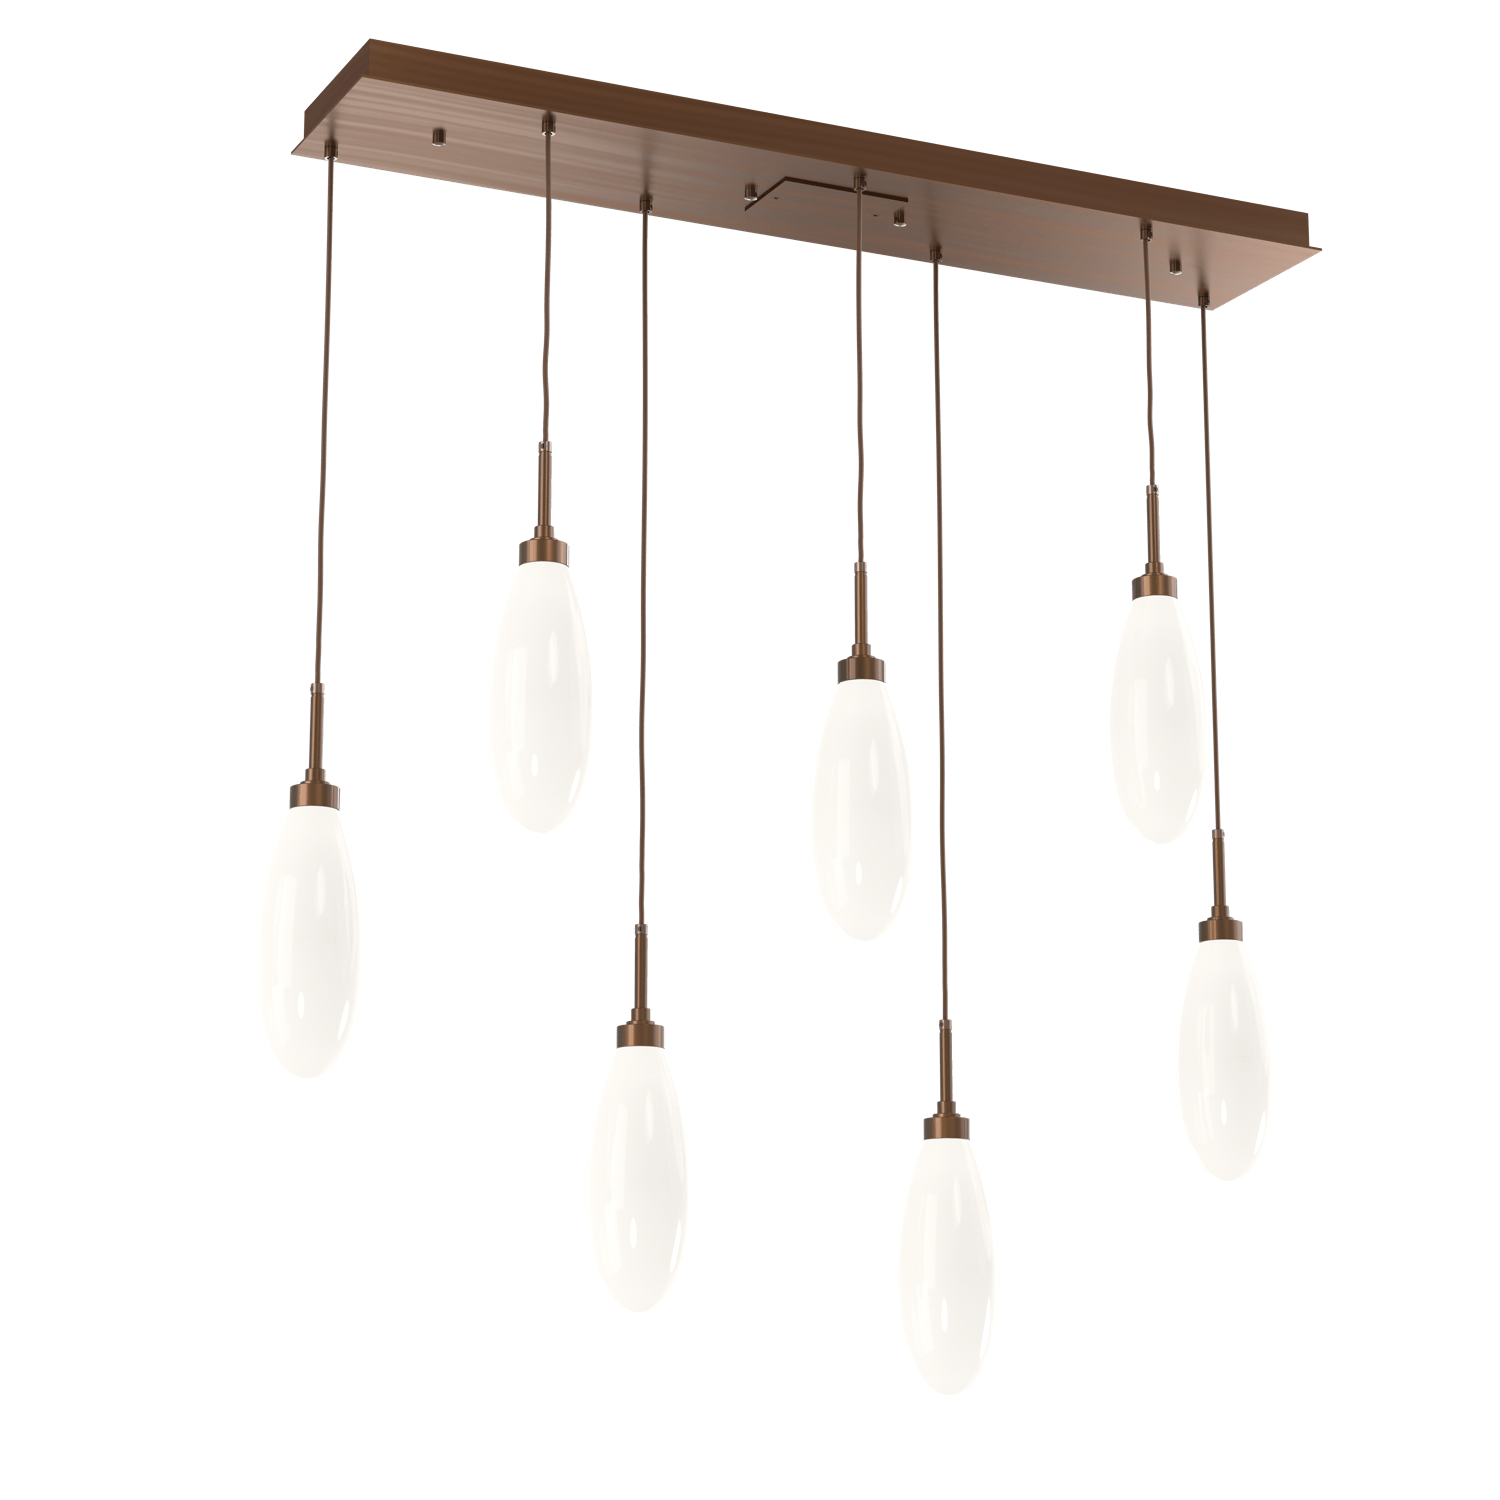 PLB0071-07-RB-WL-LL-Hammerton-Studio-Fiori-7-light-linear-pendant-chandelier-with-oil-rubbed-bronze-finish-and-opal-white-glass-shades-and-LED-lamping